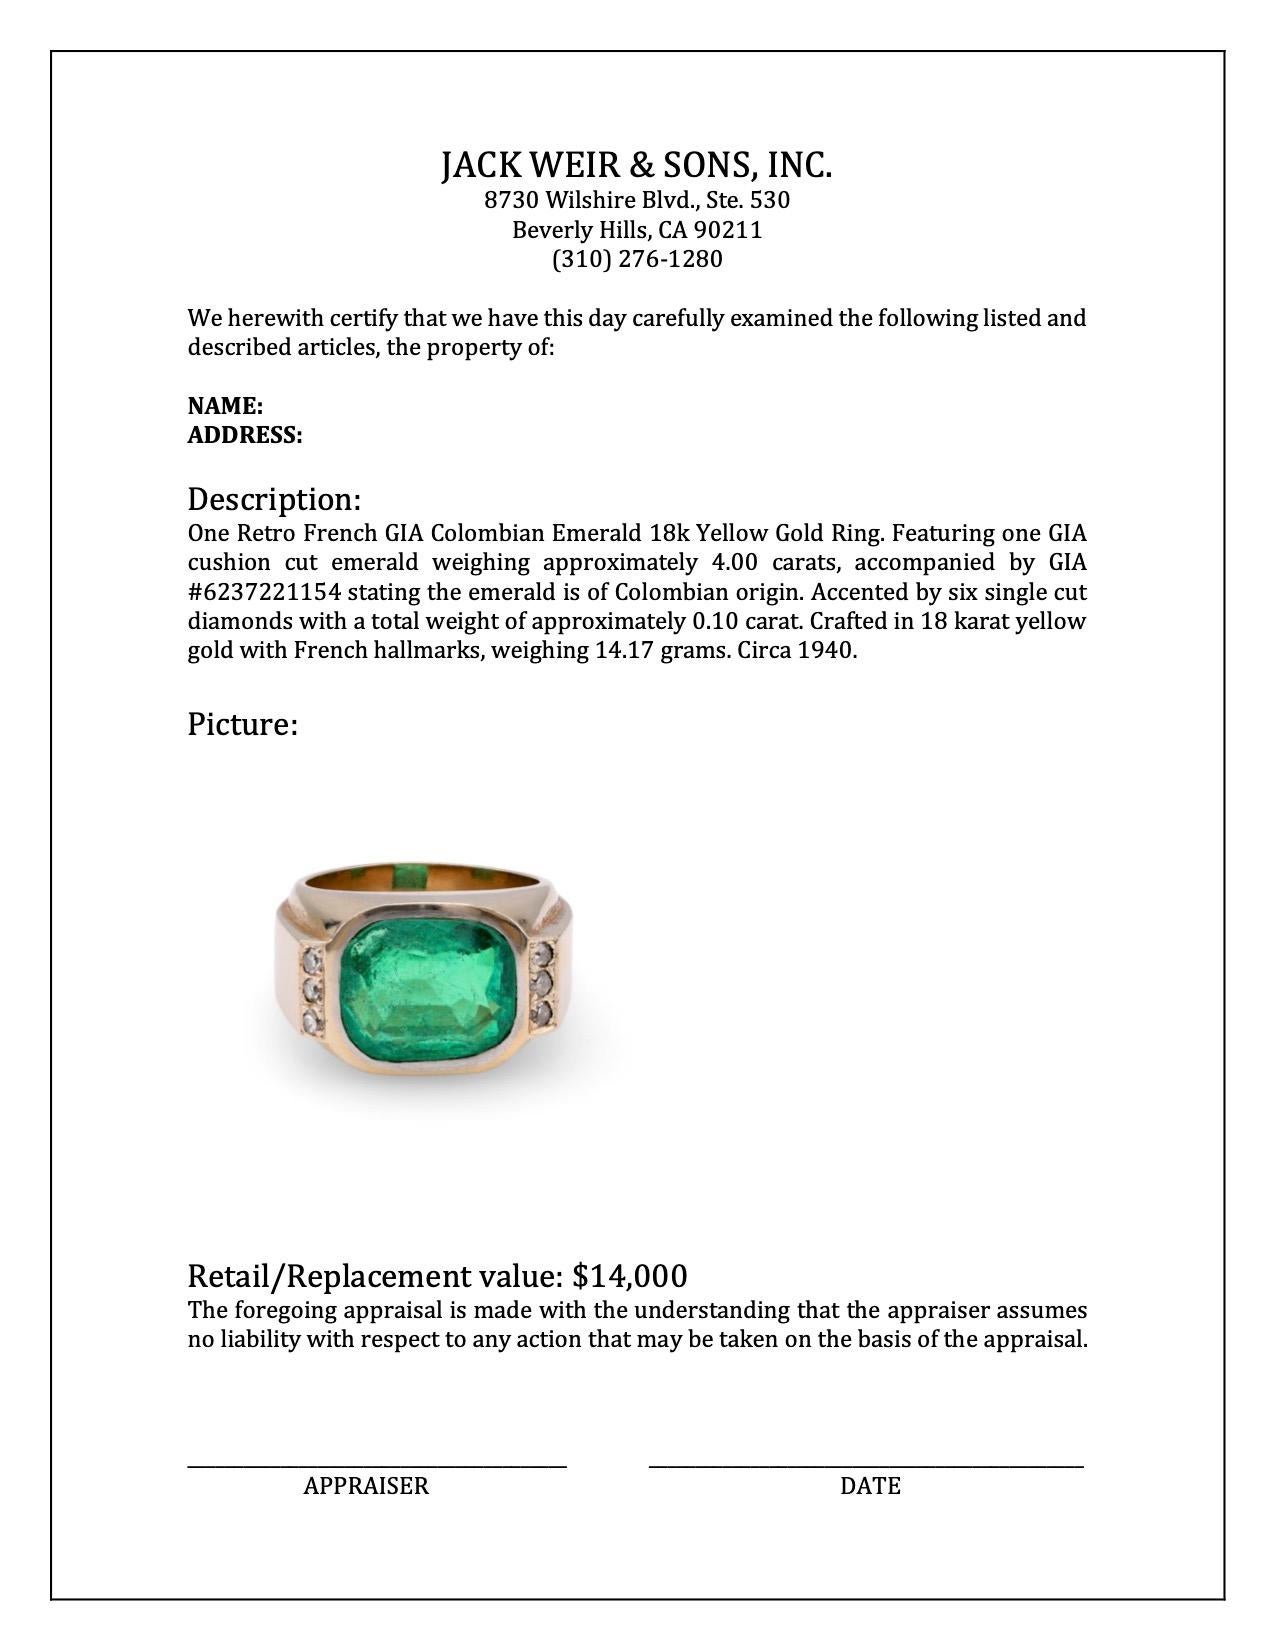 Retro French GIA Colombian Emerald 18k Yellow Gold Ring For Sale 2